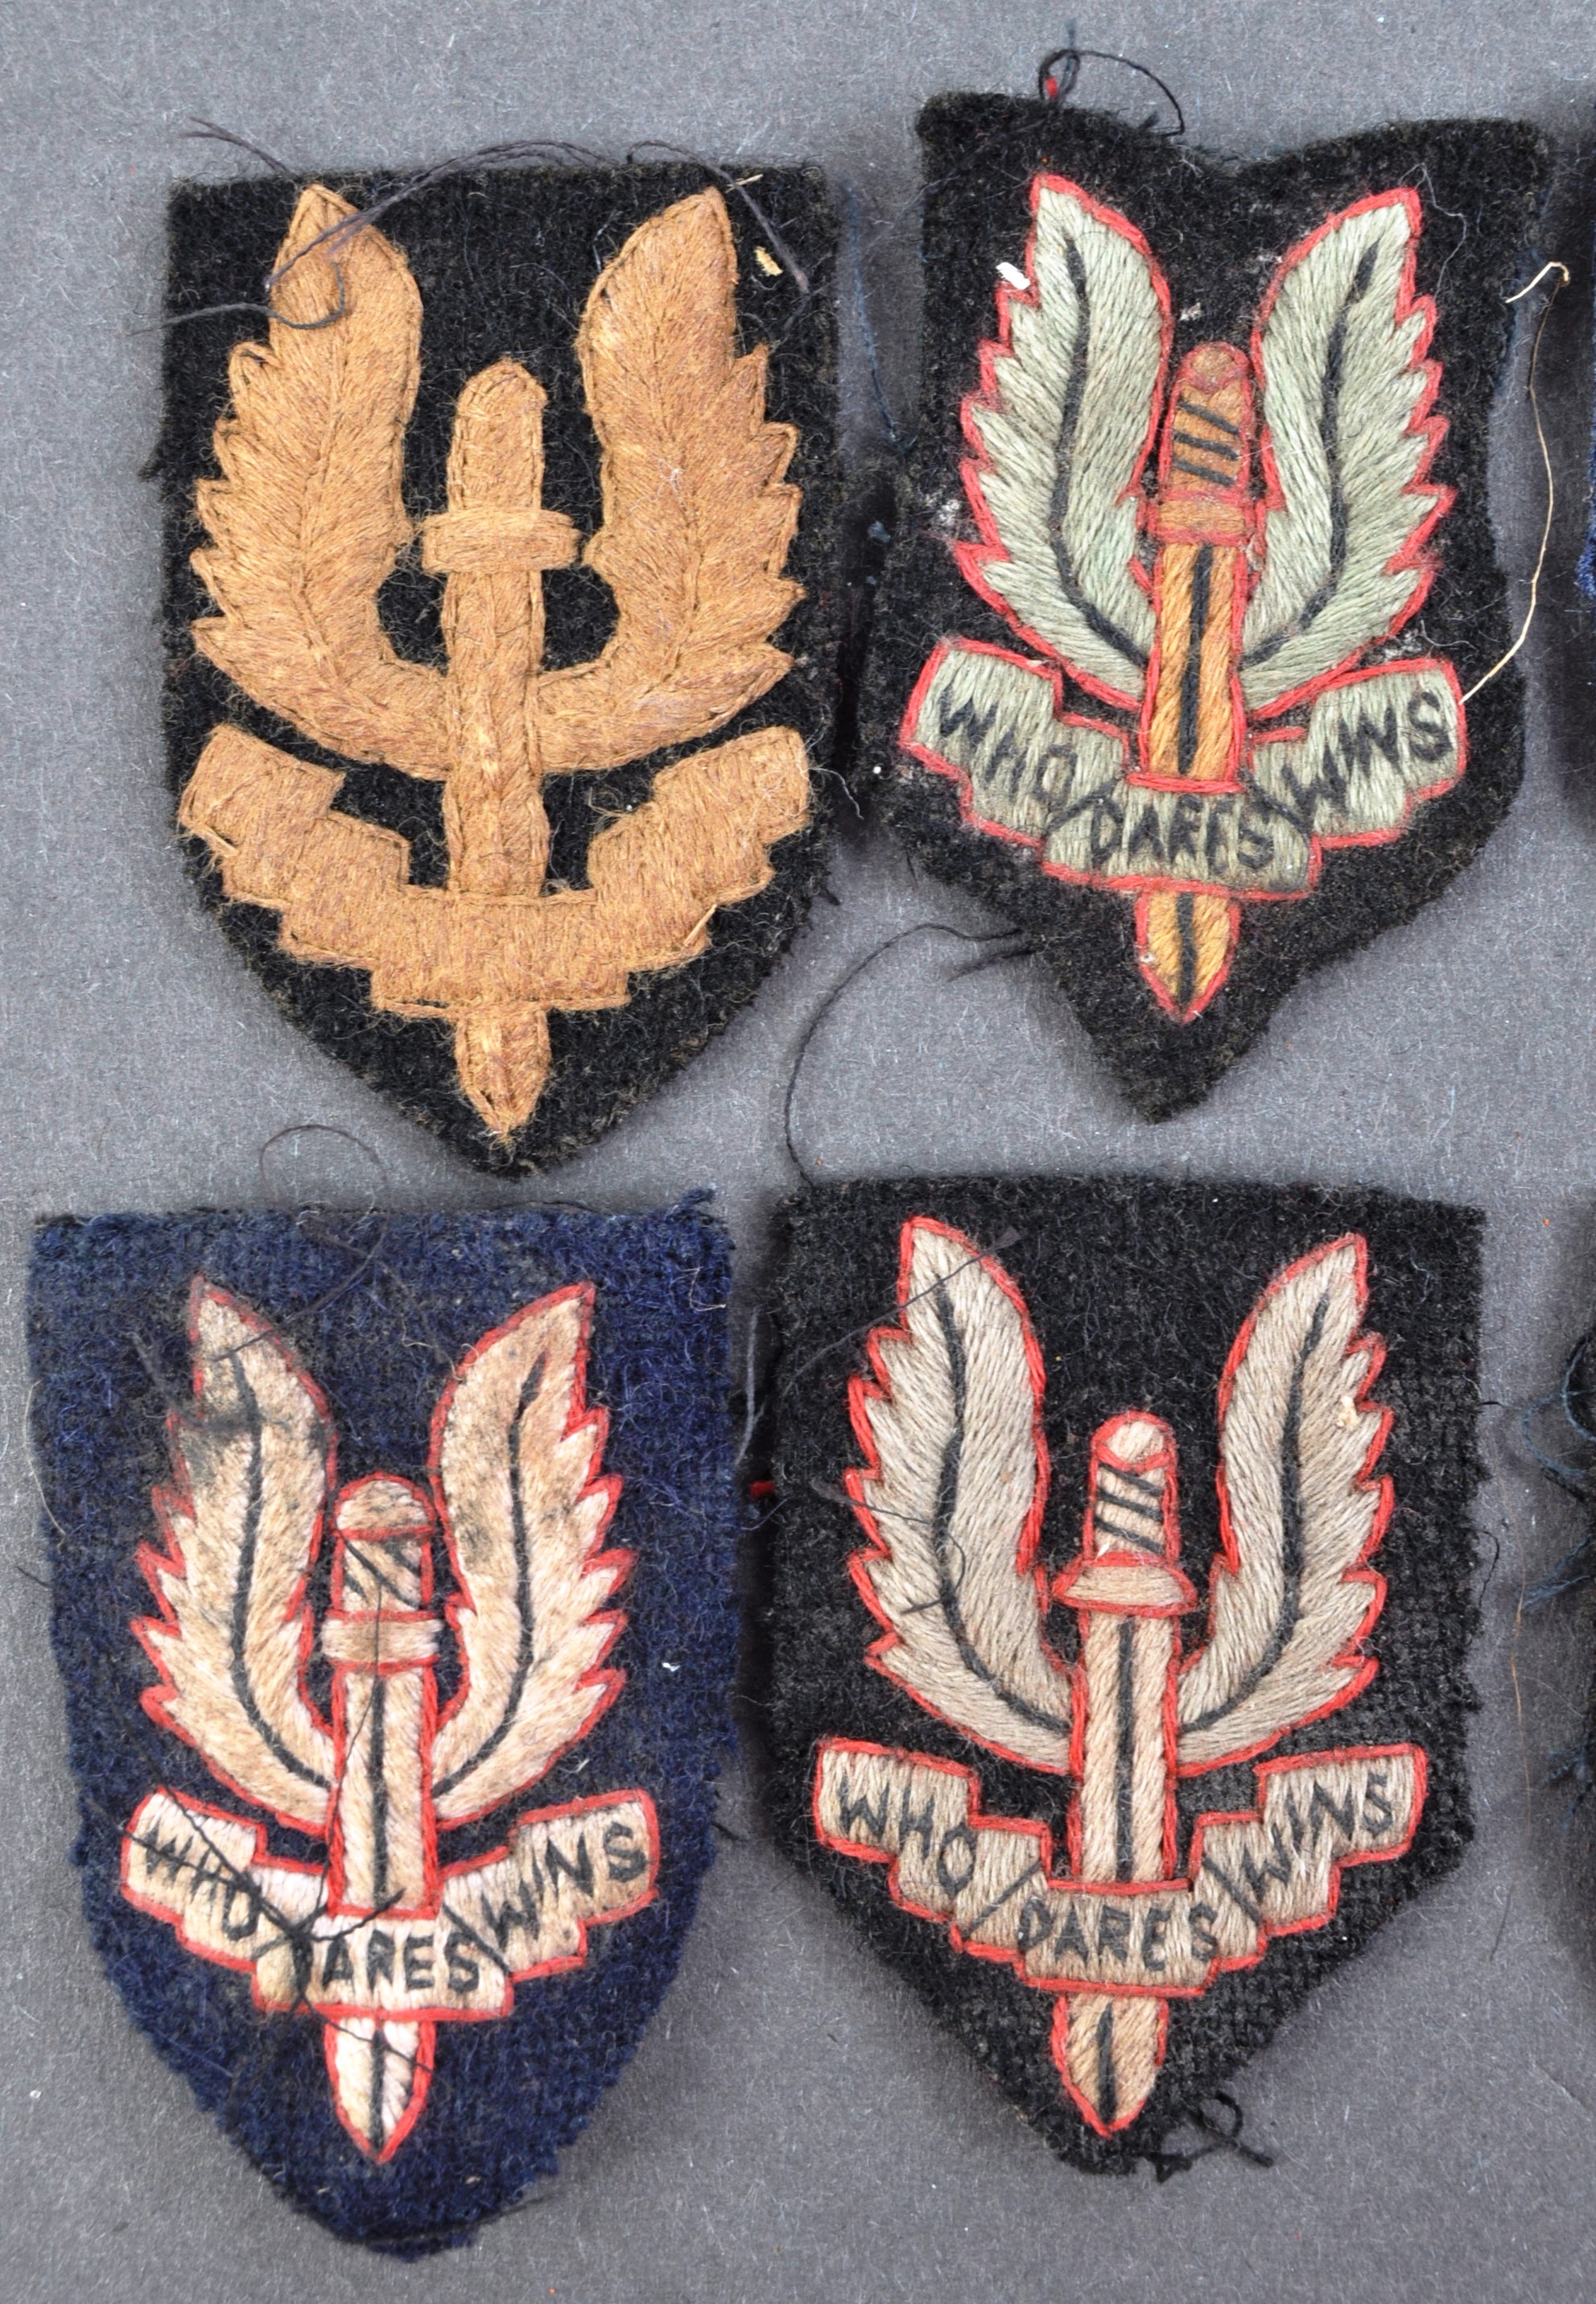 COLLECTION OF WWII SECOND WORLD WAR TYPE SAS PATCHES - Image 2 of 4